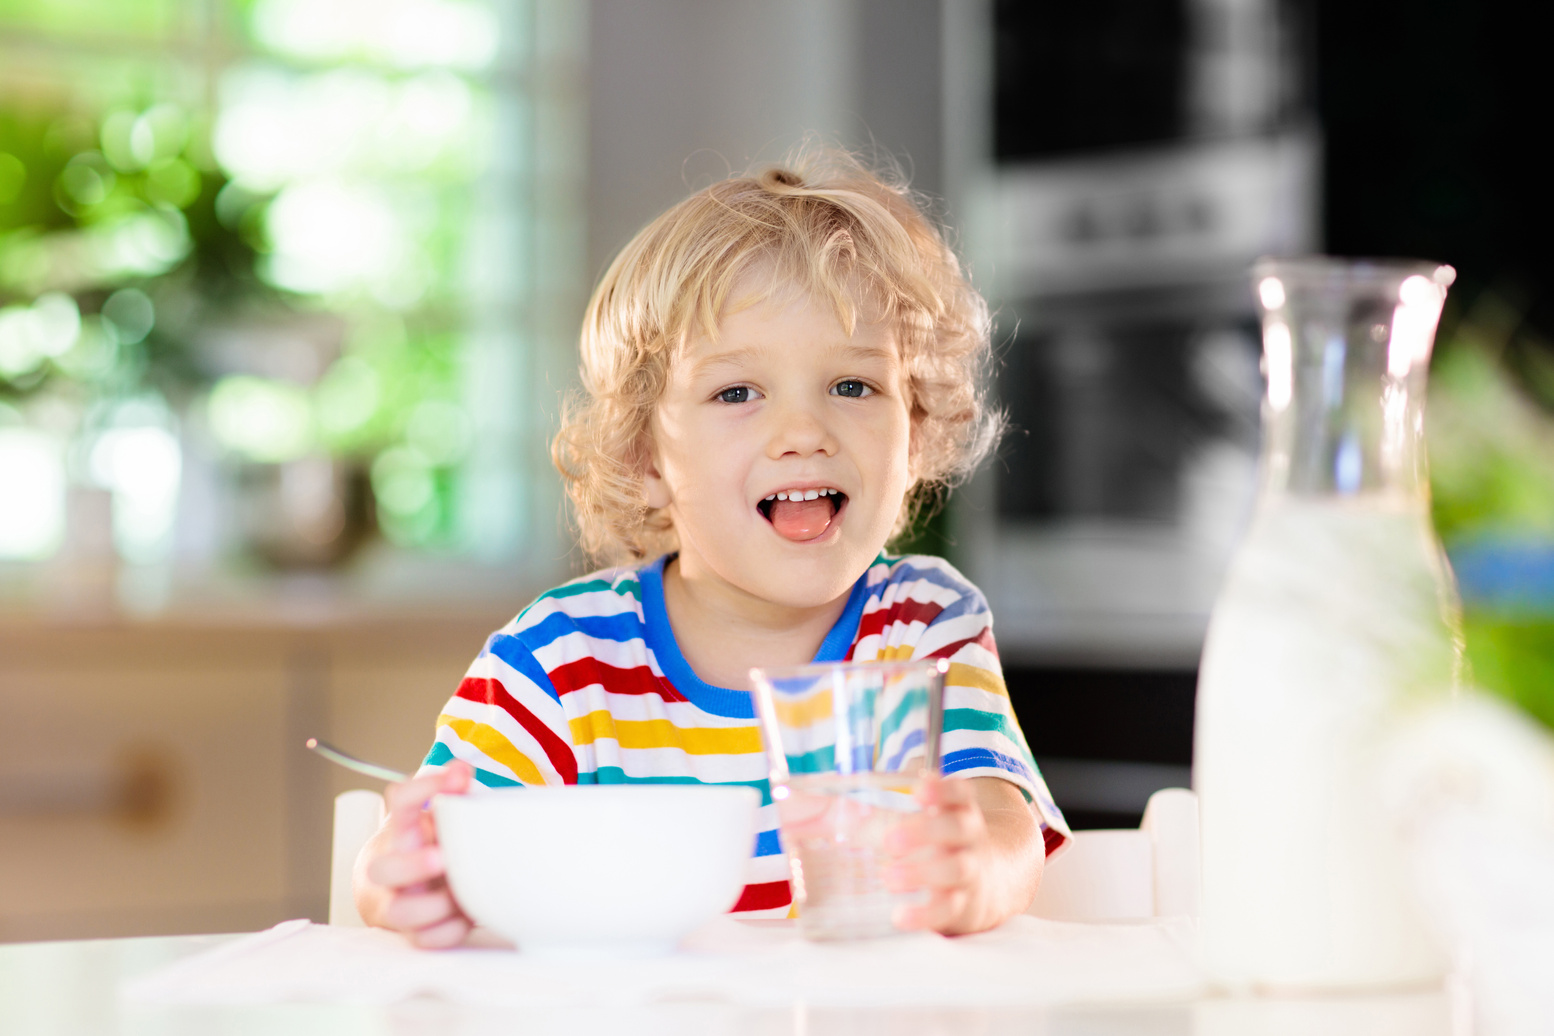 Child eating breakfast. Kid with milk and cereal.